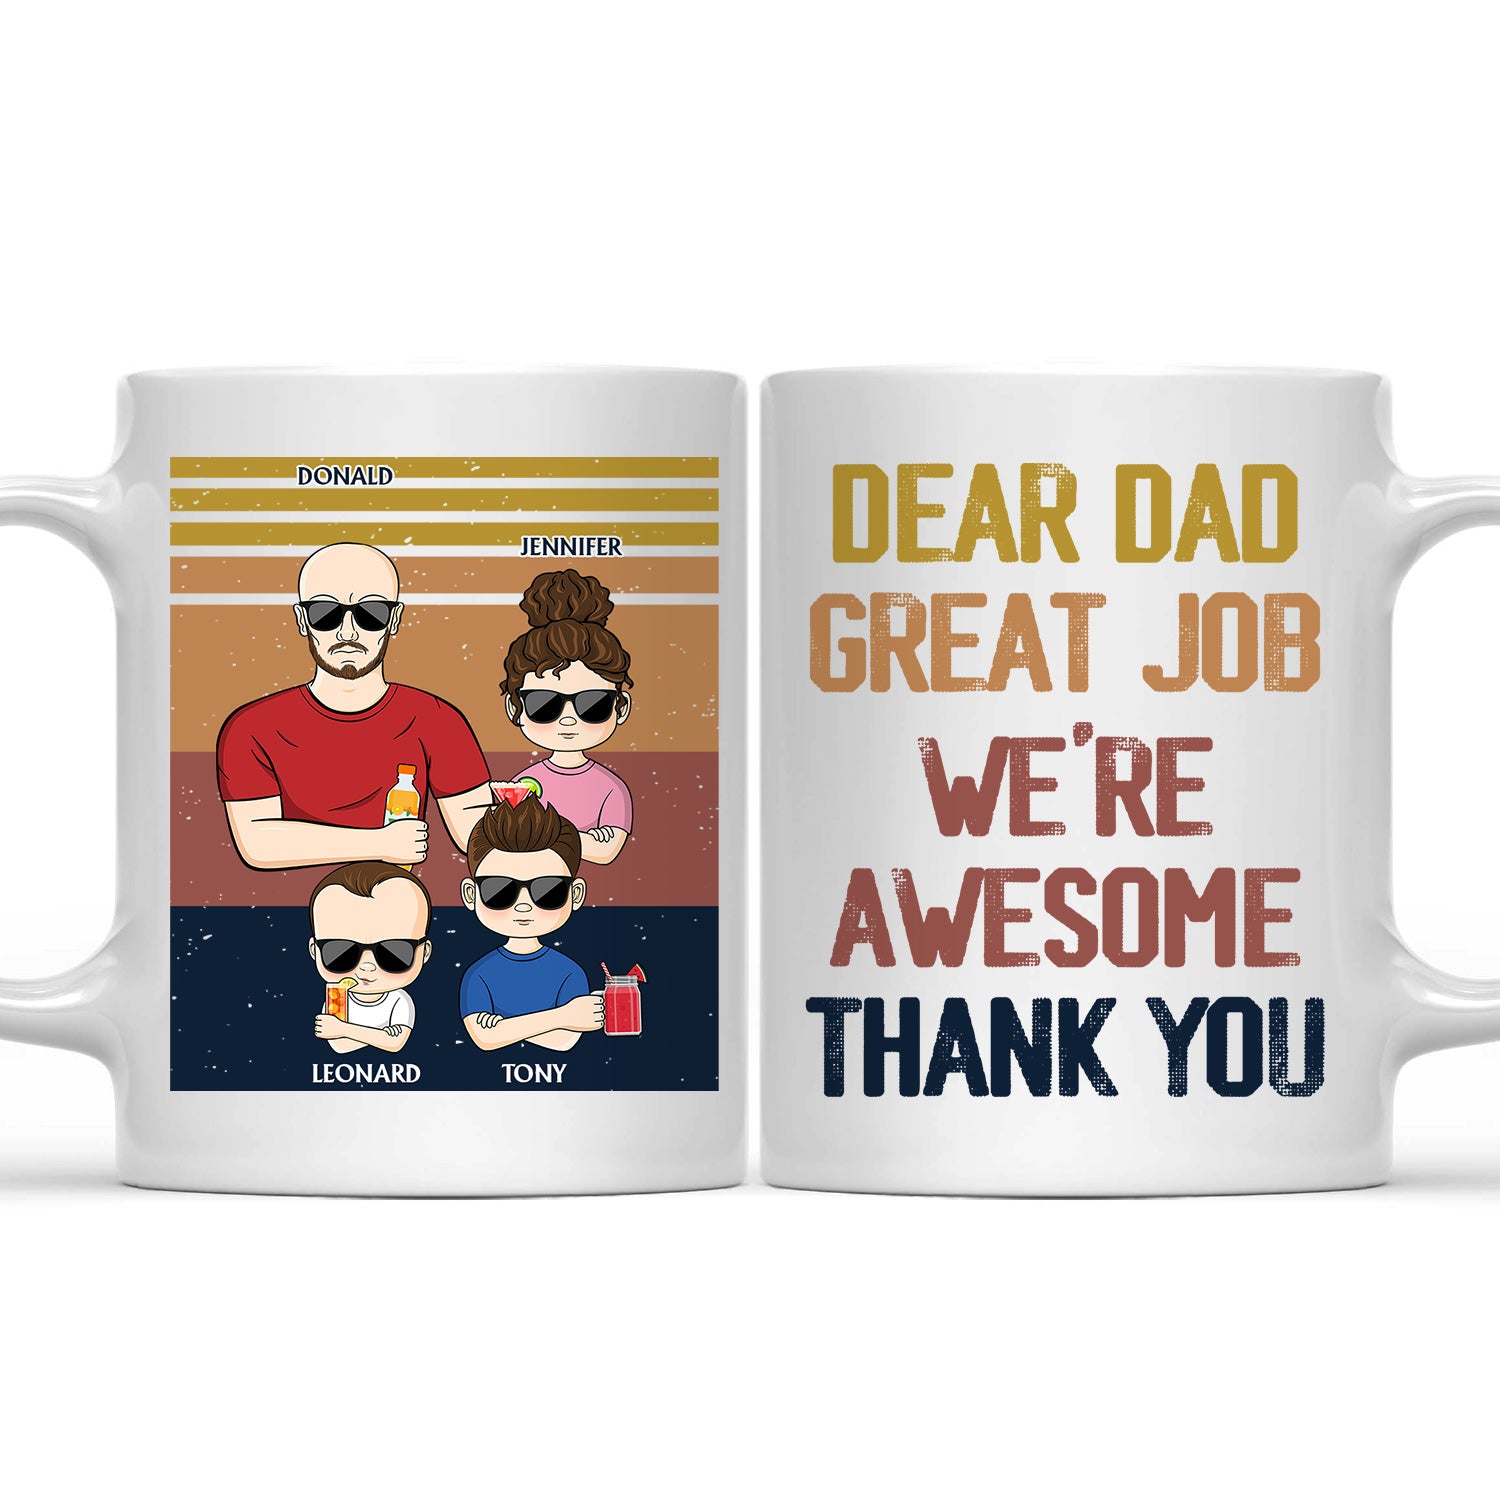 Dear Dad Great Job I'm Awesome Thank You Young - Birthday, Loving Gift For Dad, Father, Grandpa, Grandfather - Personalized Custom Mug